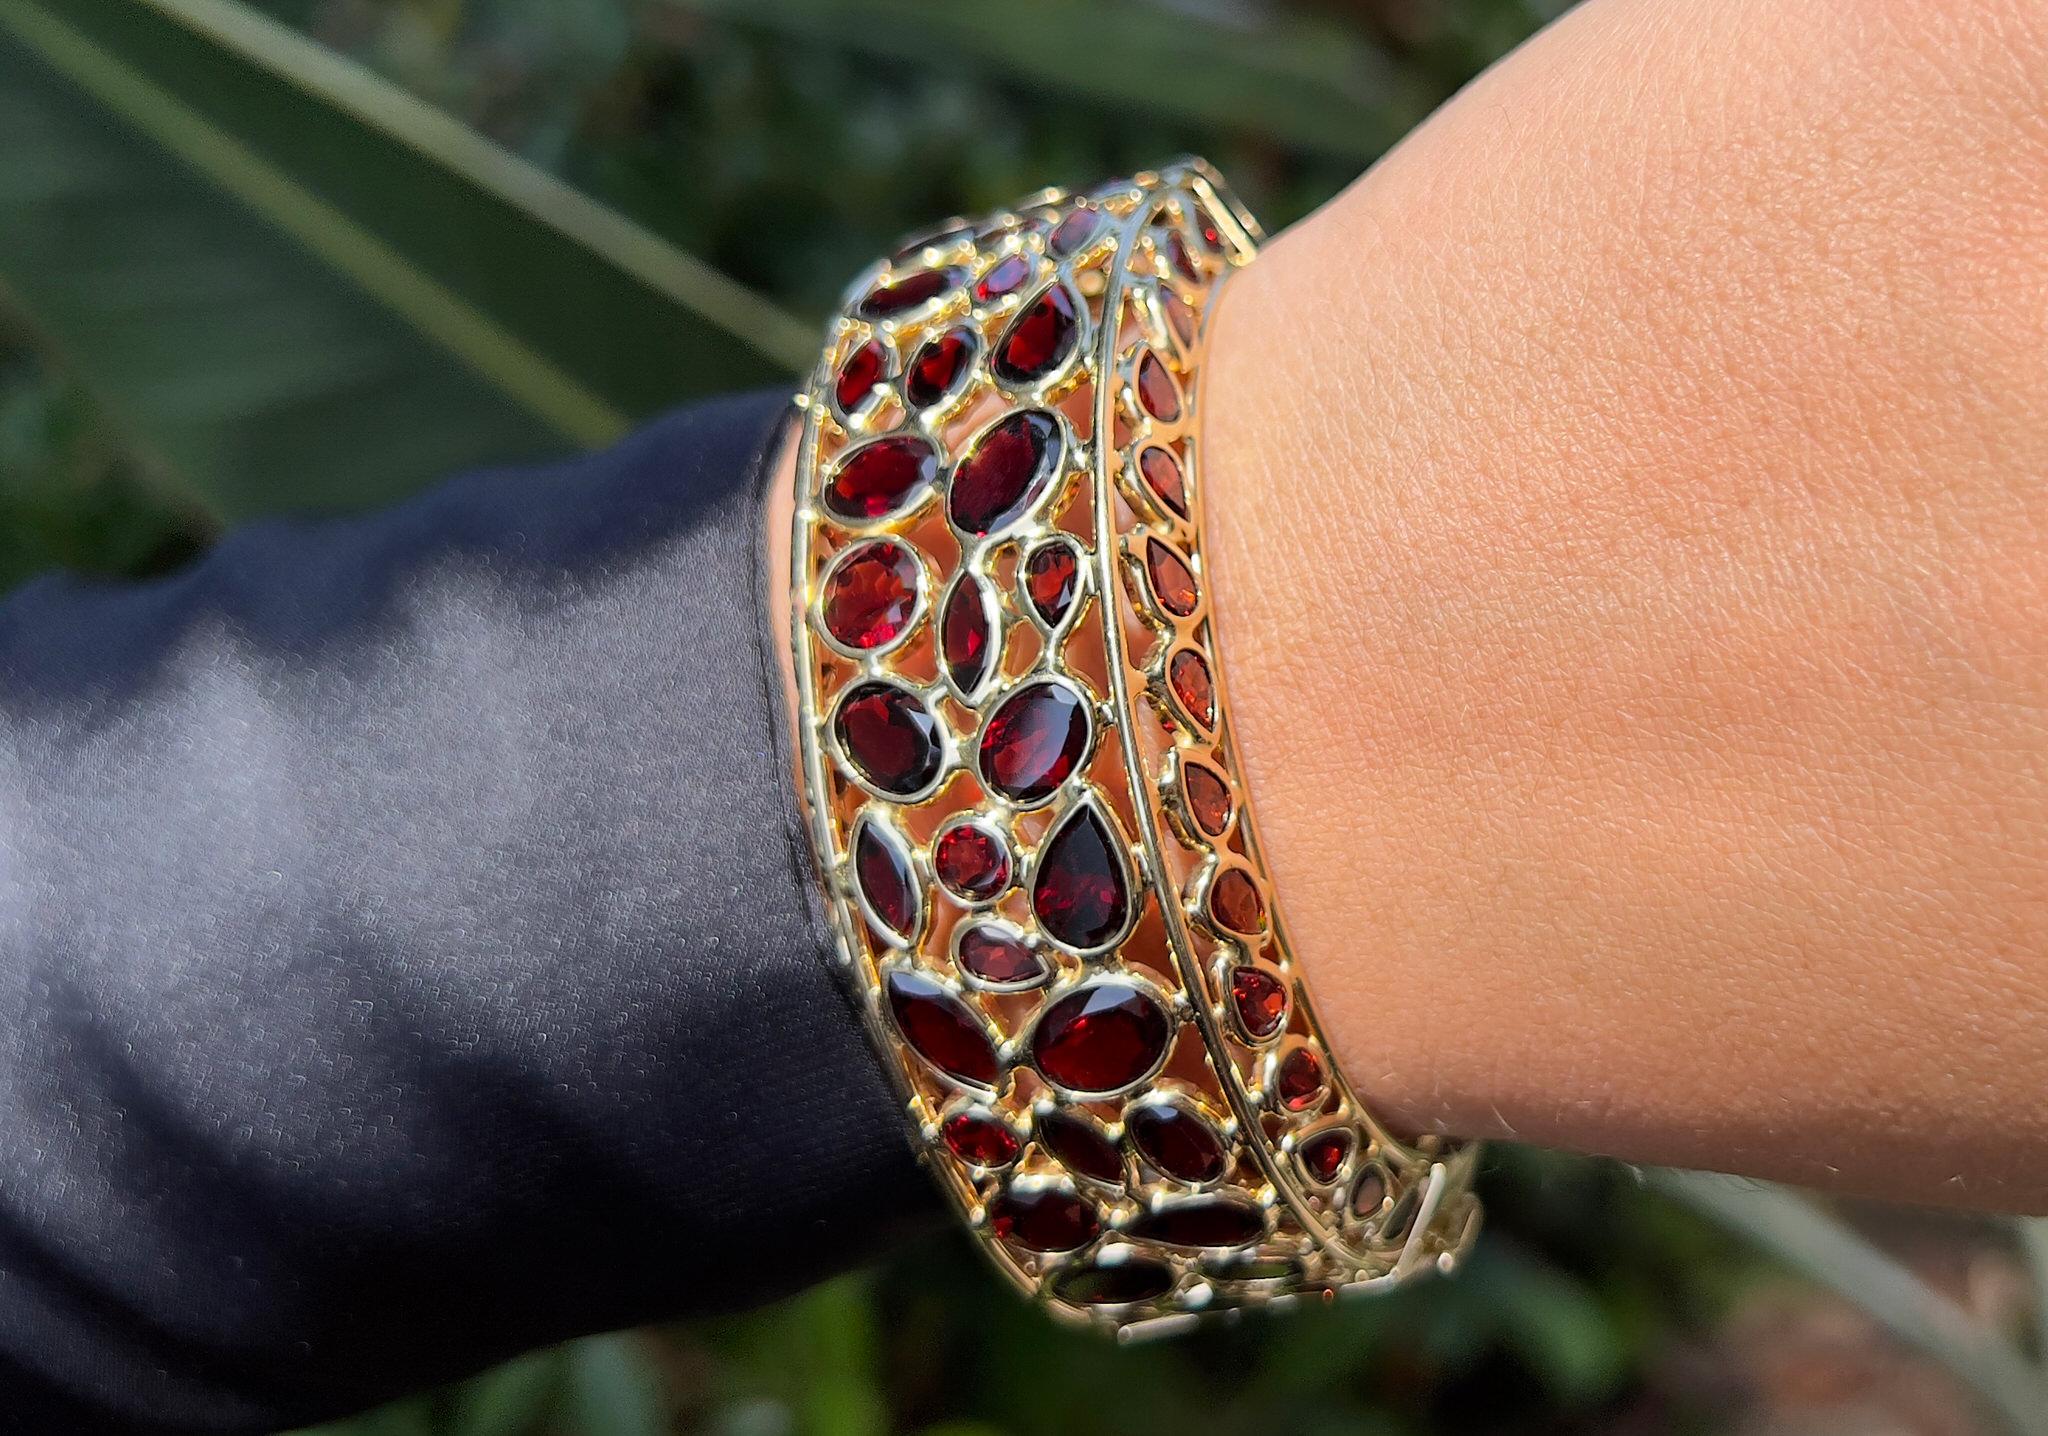 Mixed Cut Important Cougar Bangle Bracelet Red Garnets 100 Carats 14K Yellow Gold For Sale